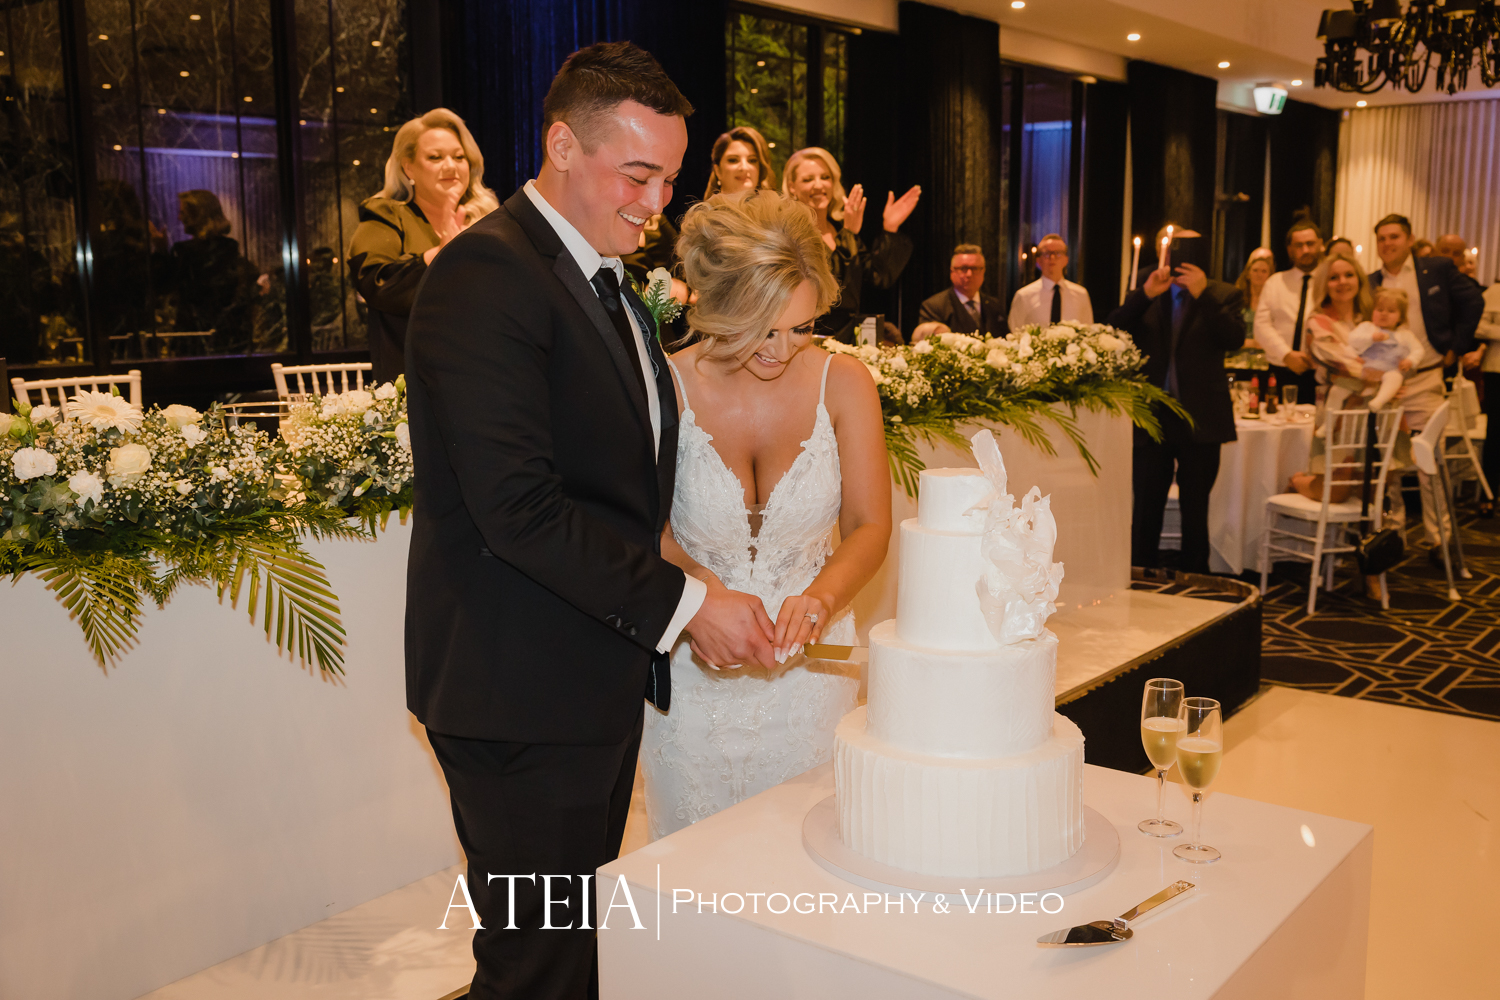 , Berndadette and Matthew&#8217;s wedding at Lakeside Receptions captured by ATEIA Photography &#038; Video